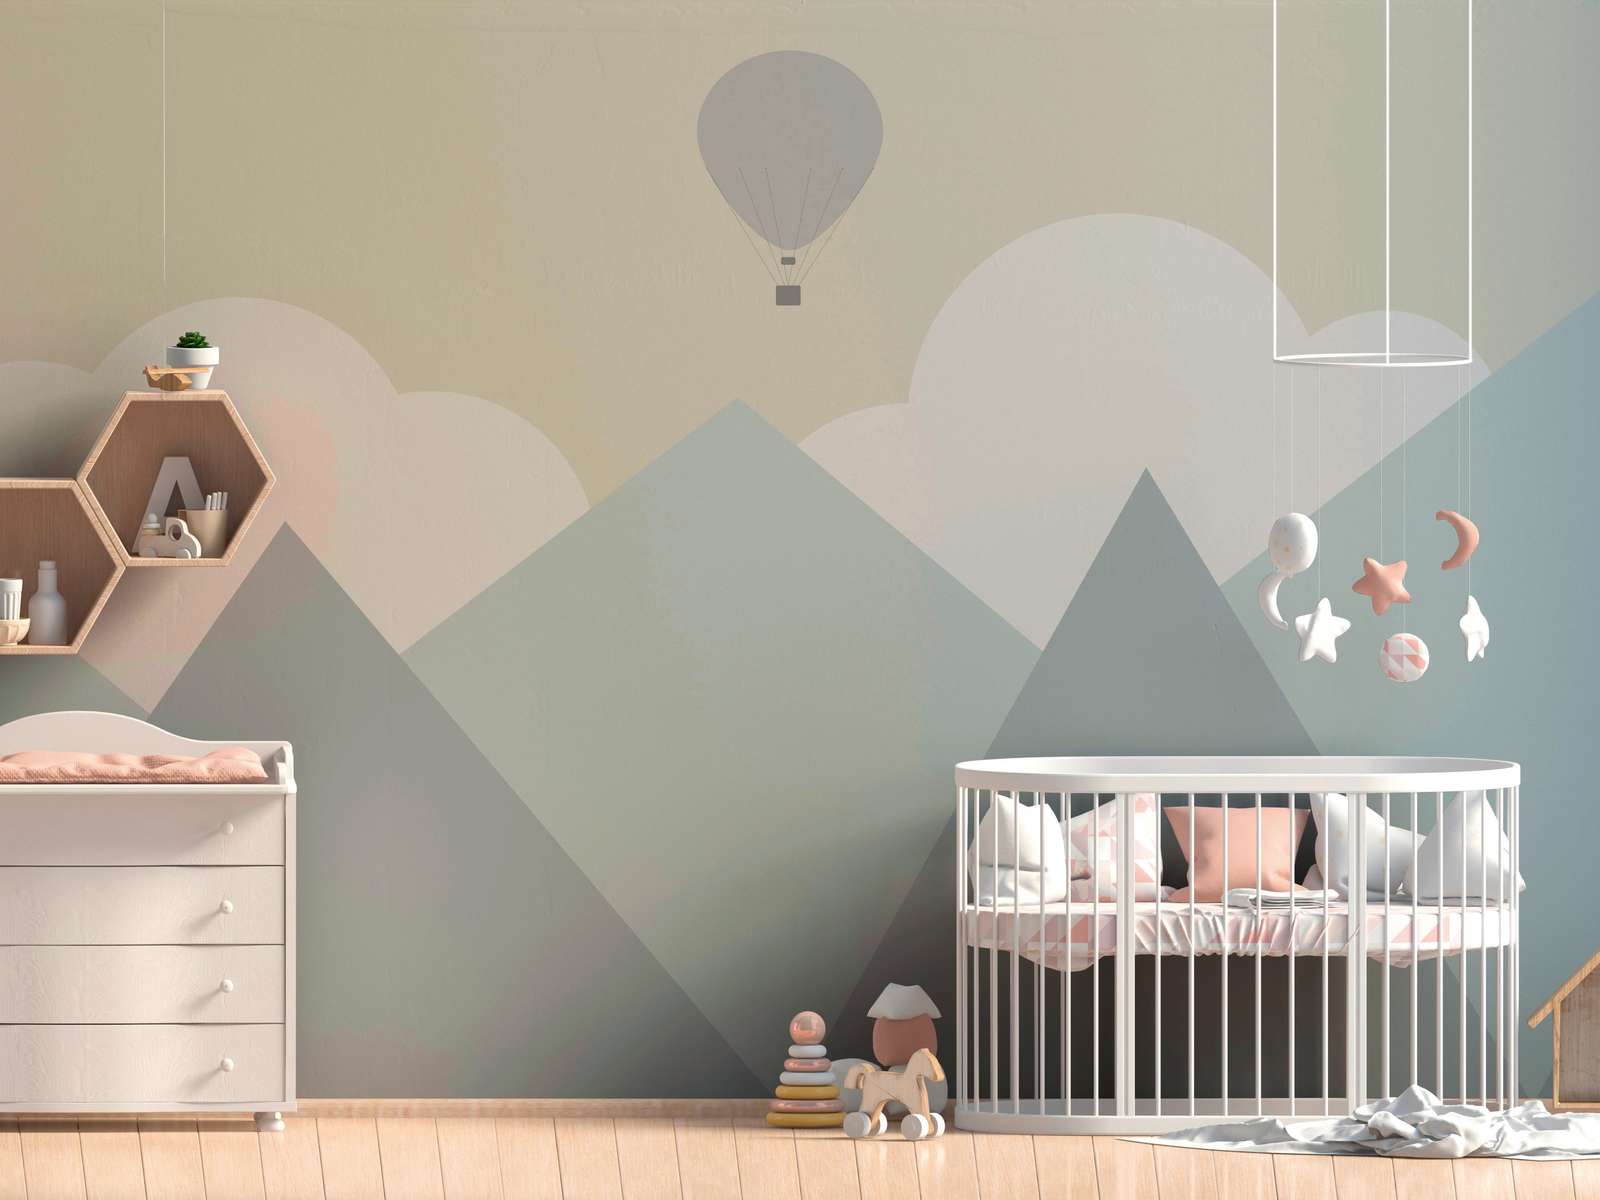             Nursery Mountains with Clouds and Hot Air Balloon Wallpaper - Yellow, Green, Grey
        